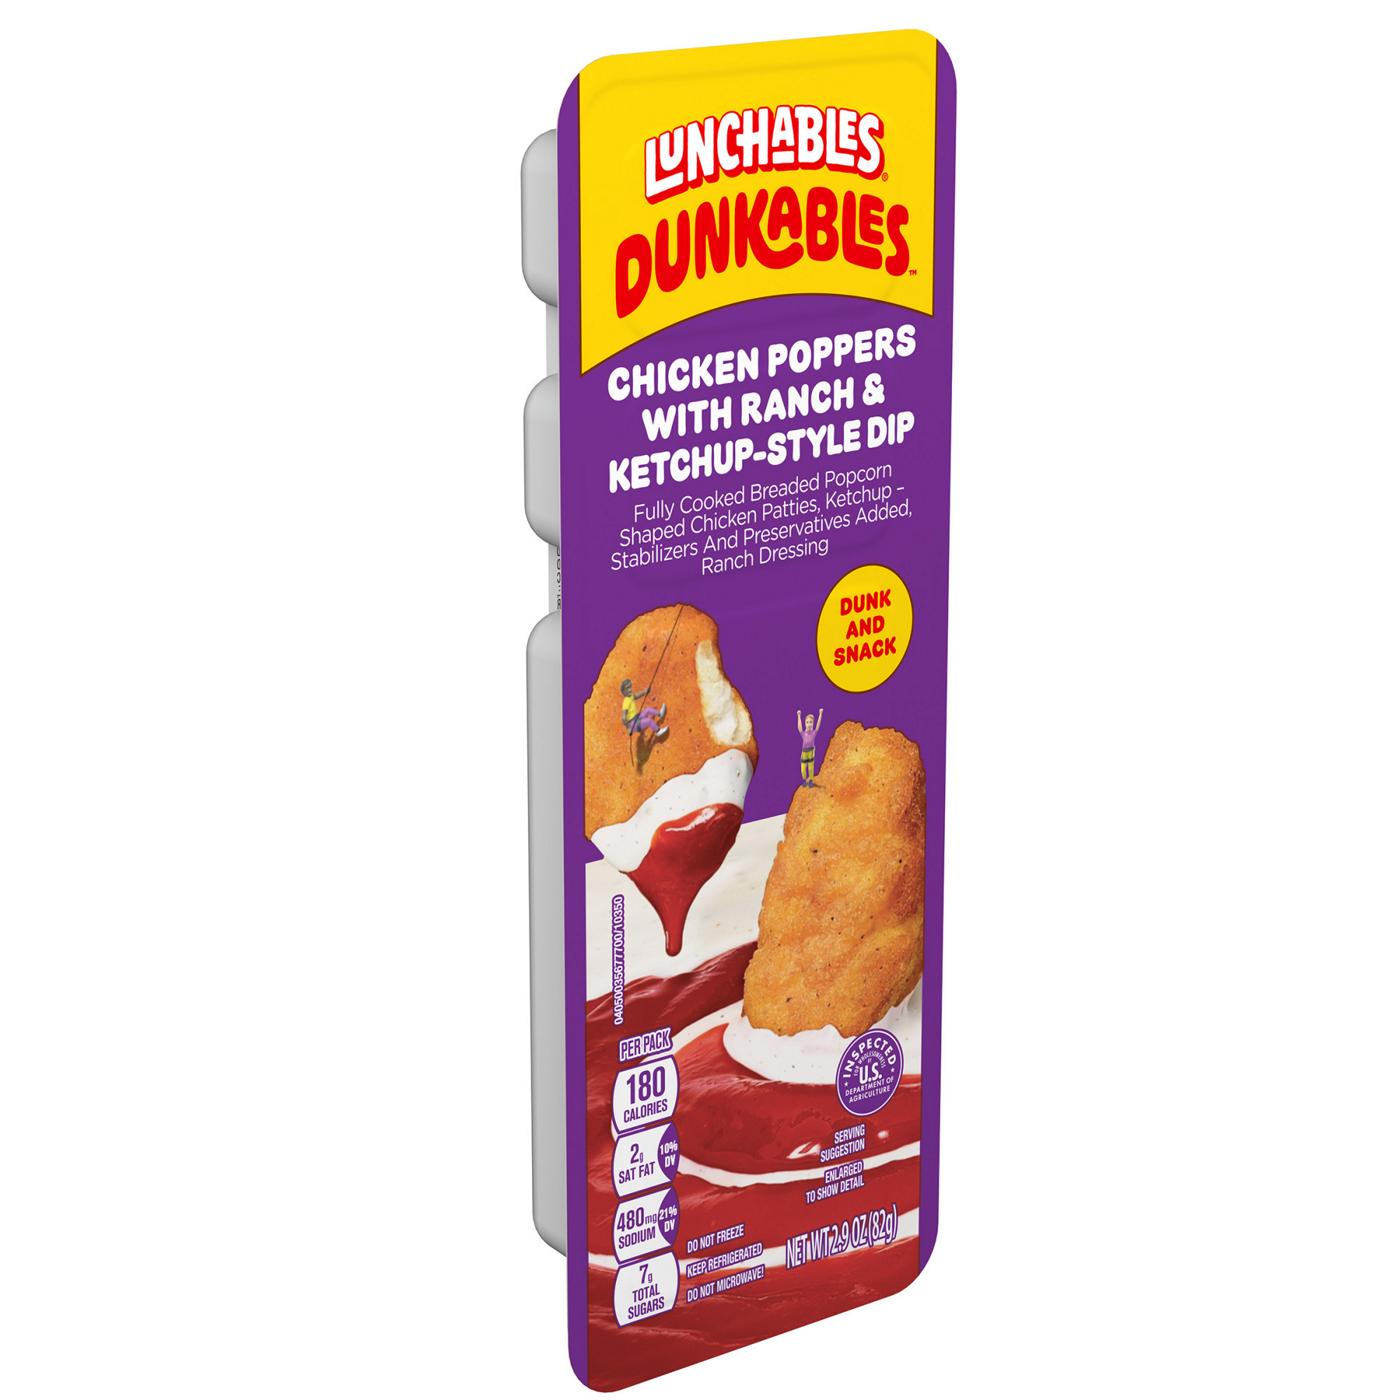 Lunchables Dunkables Snack Kit Tray - Chicken Poppers with Ranch & Ketchup; image 5 of 8